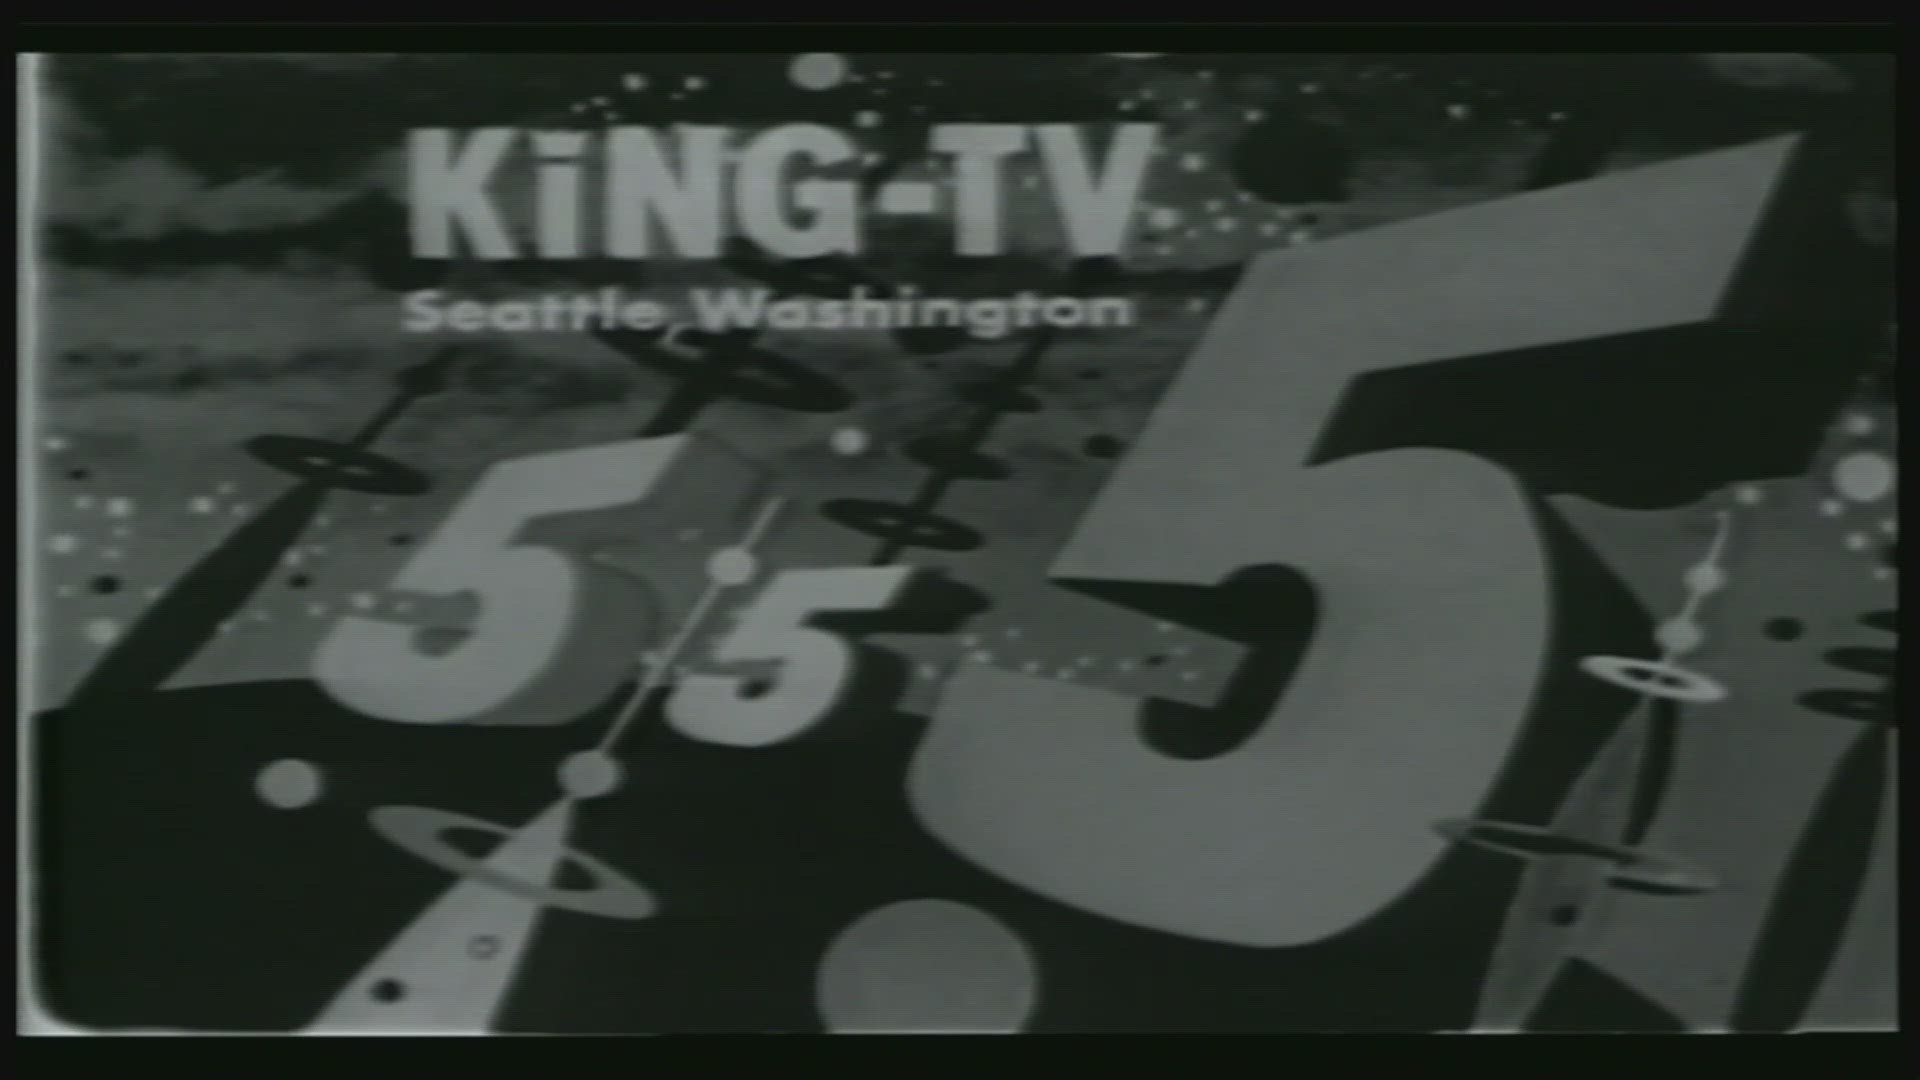 A look back at the genesis of television programming in Seattle on the 75th birthday of KING 5 Television